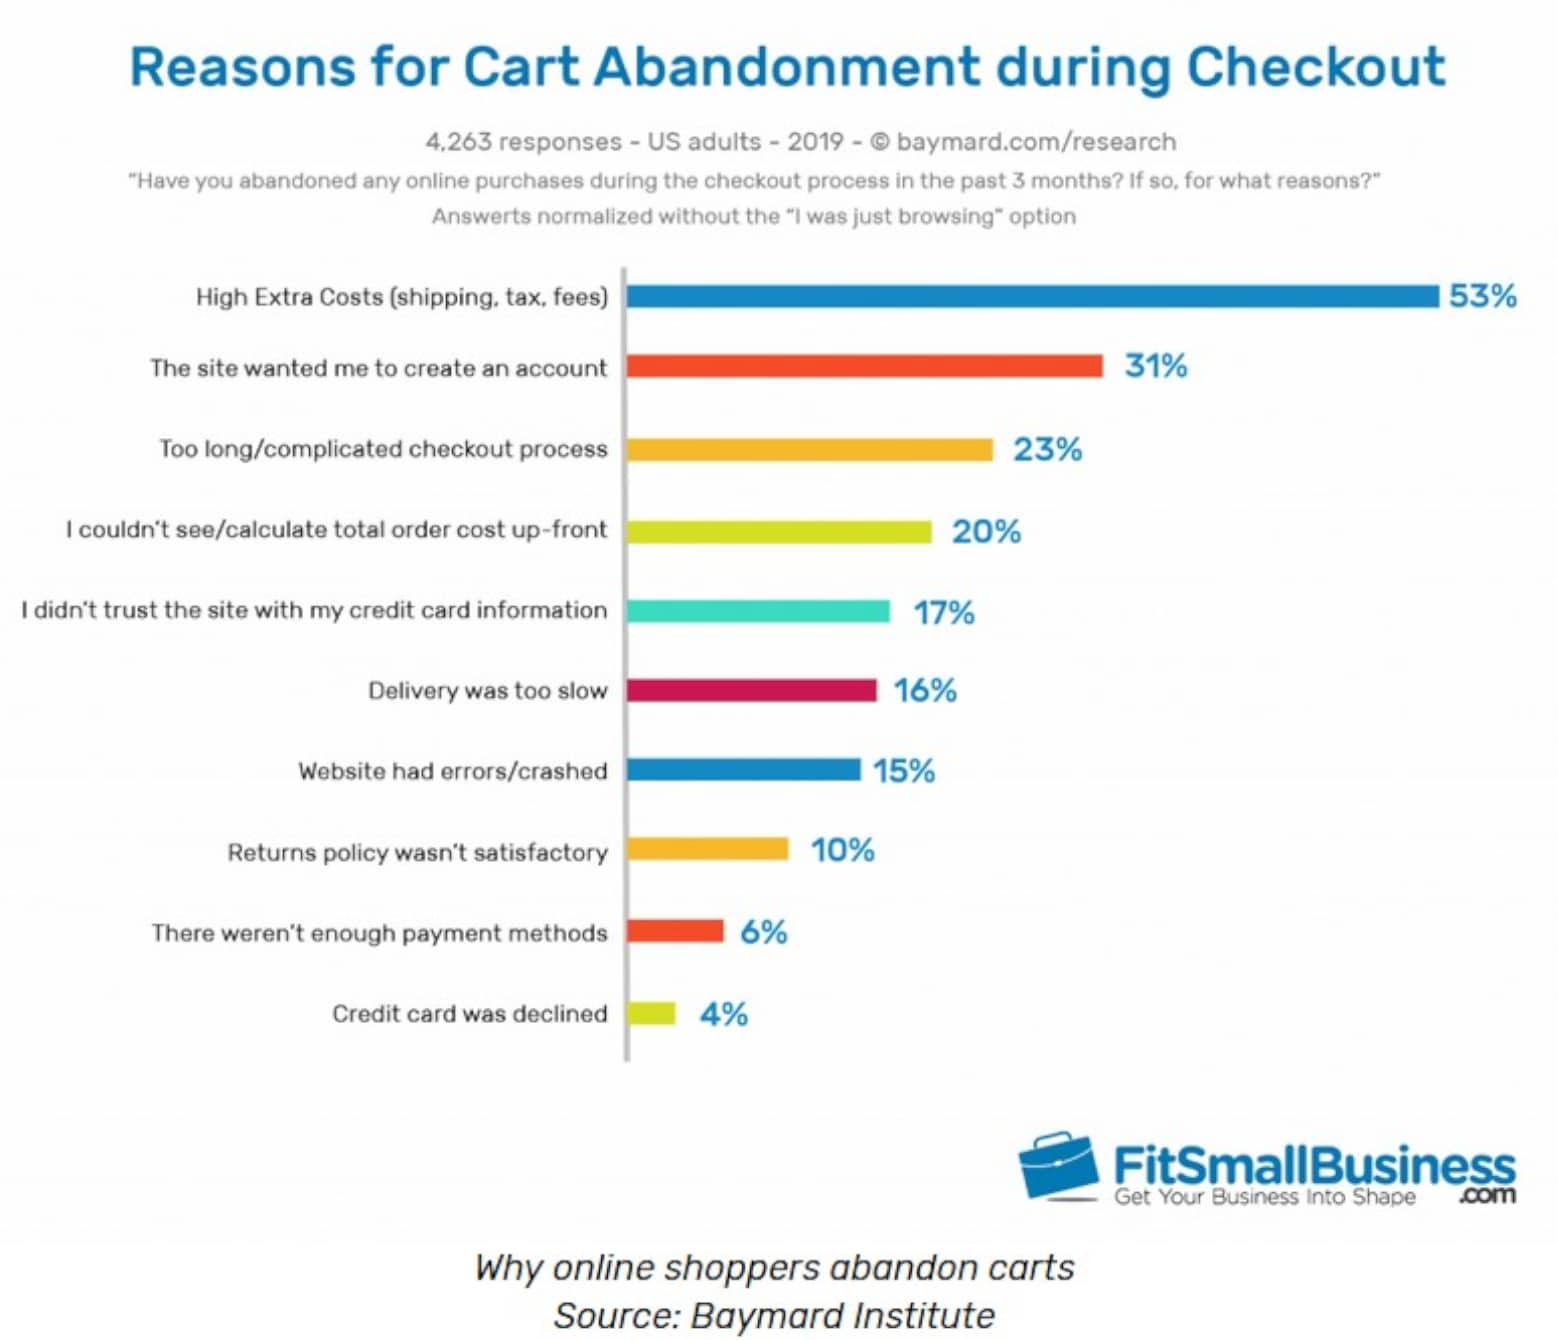 There are many reasons people abandon carts, but there are ways to prevent that.